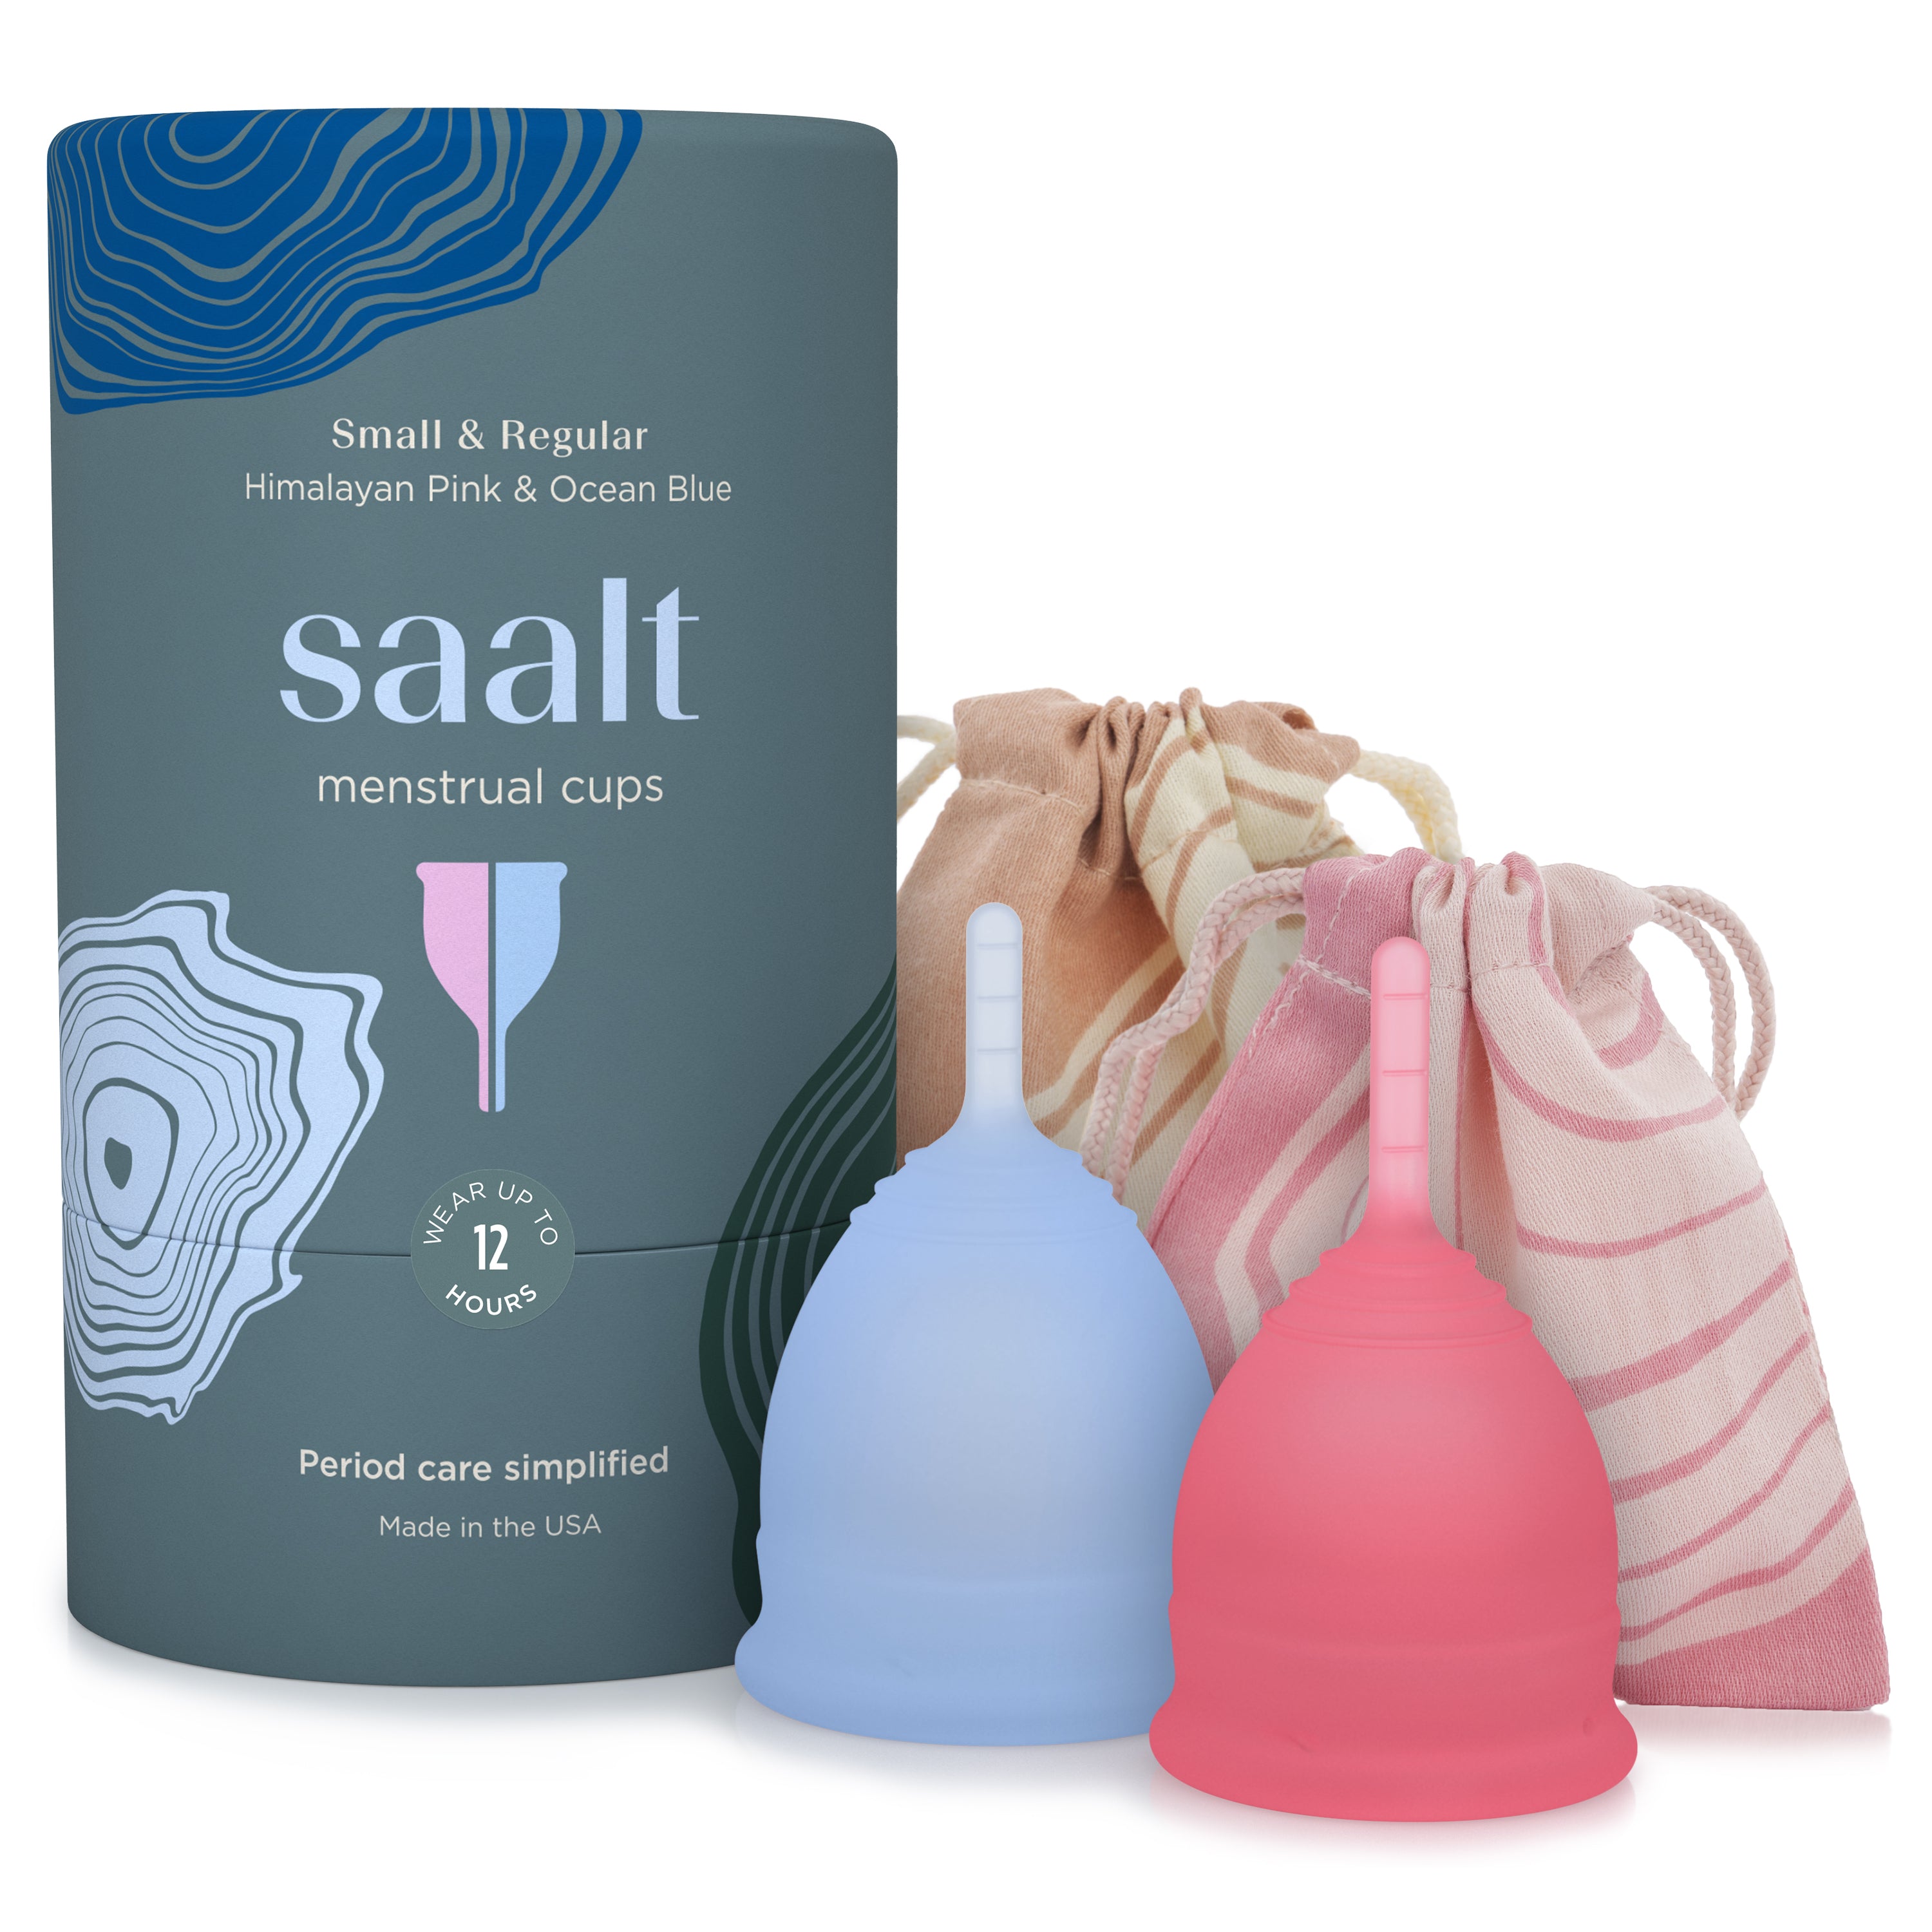 Menstrual cup duo pack in blue and pink.